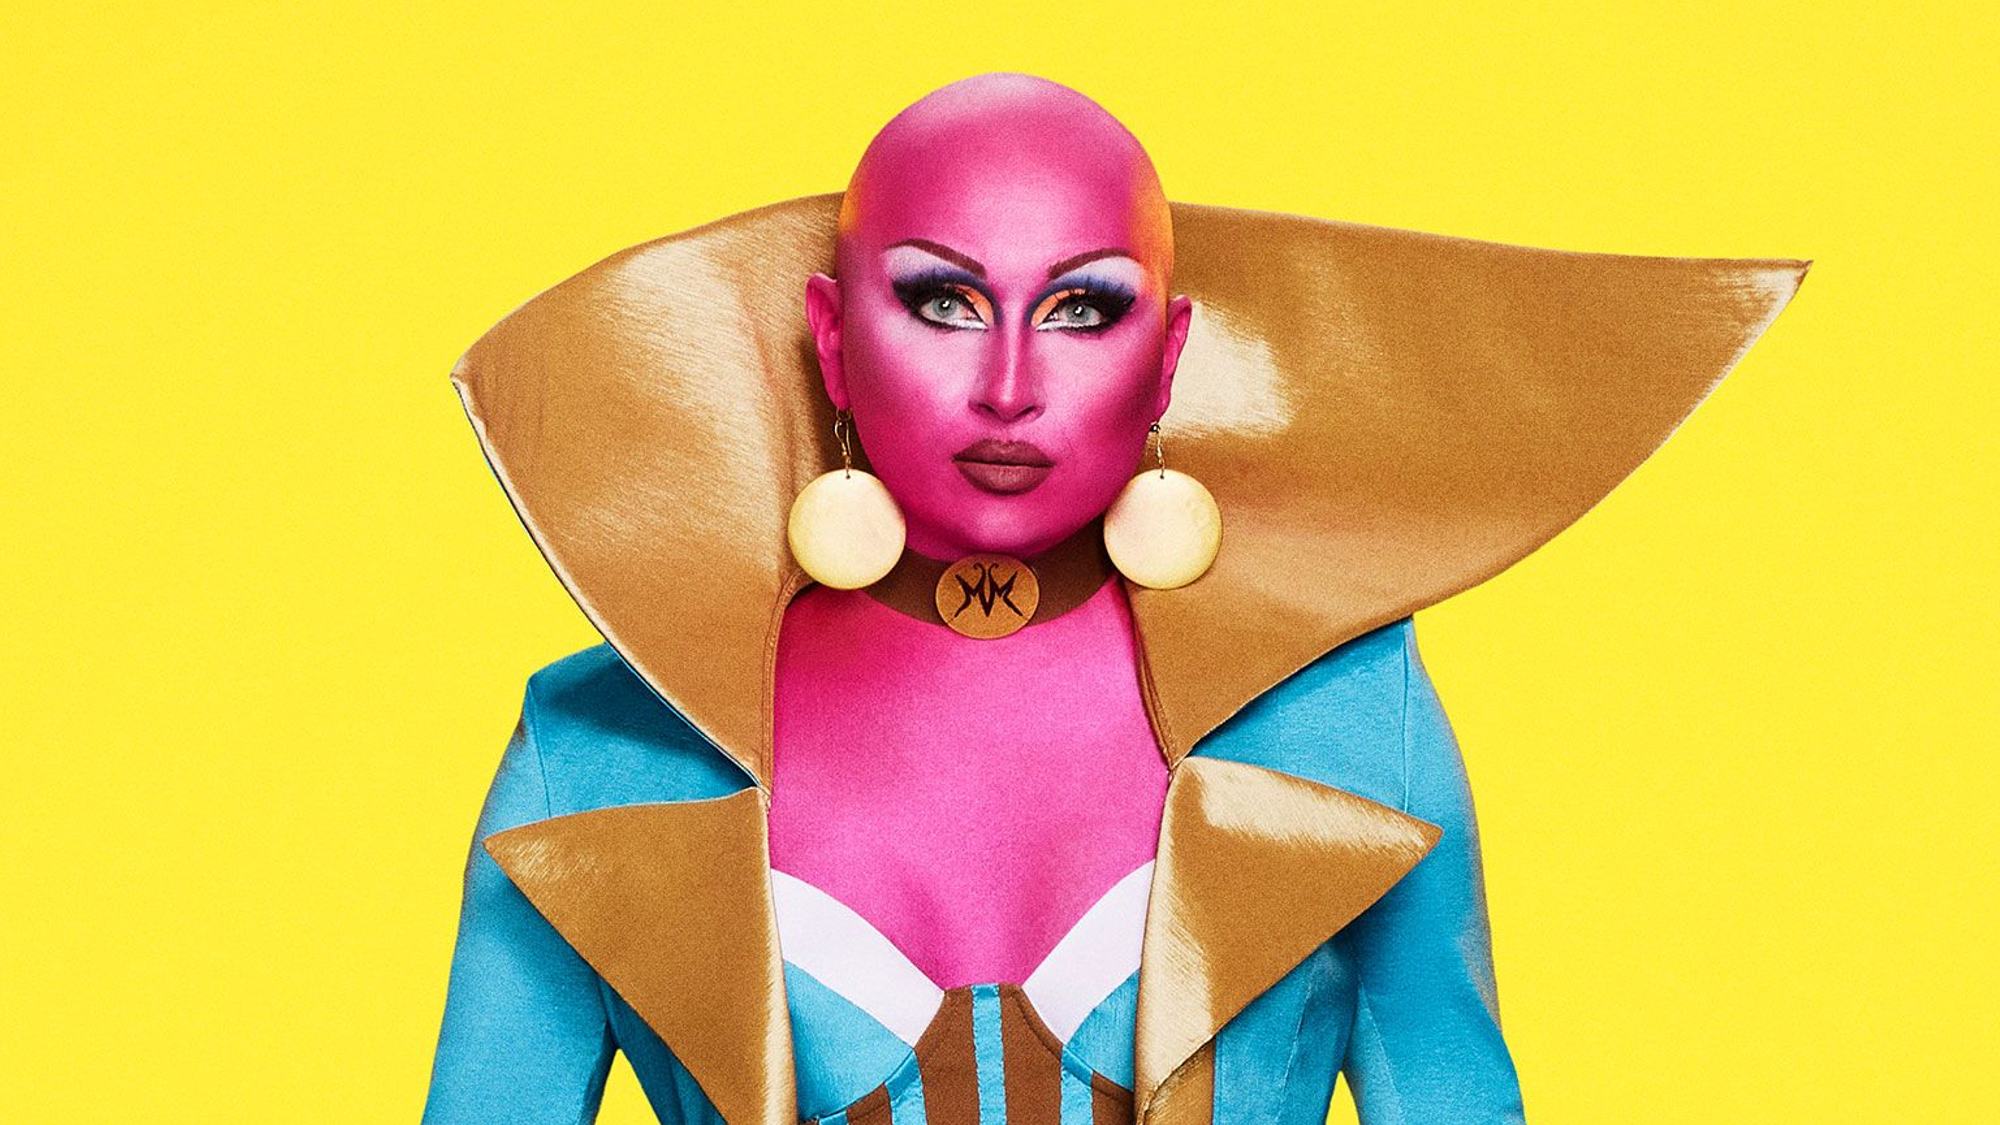 How to watch RuPaul's Drag Race season 14 episode 2 online Tom's Guide